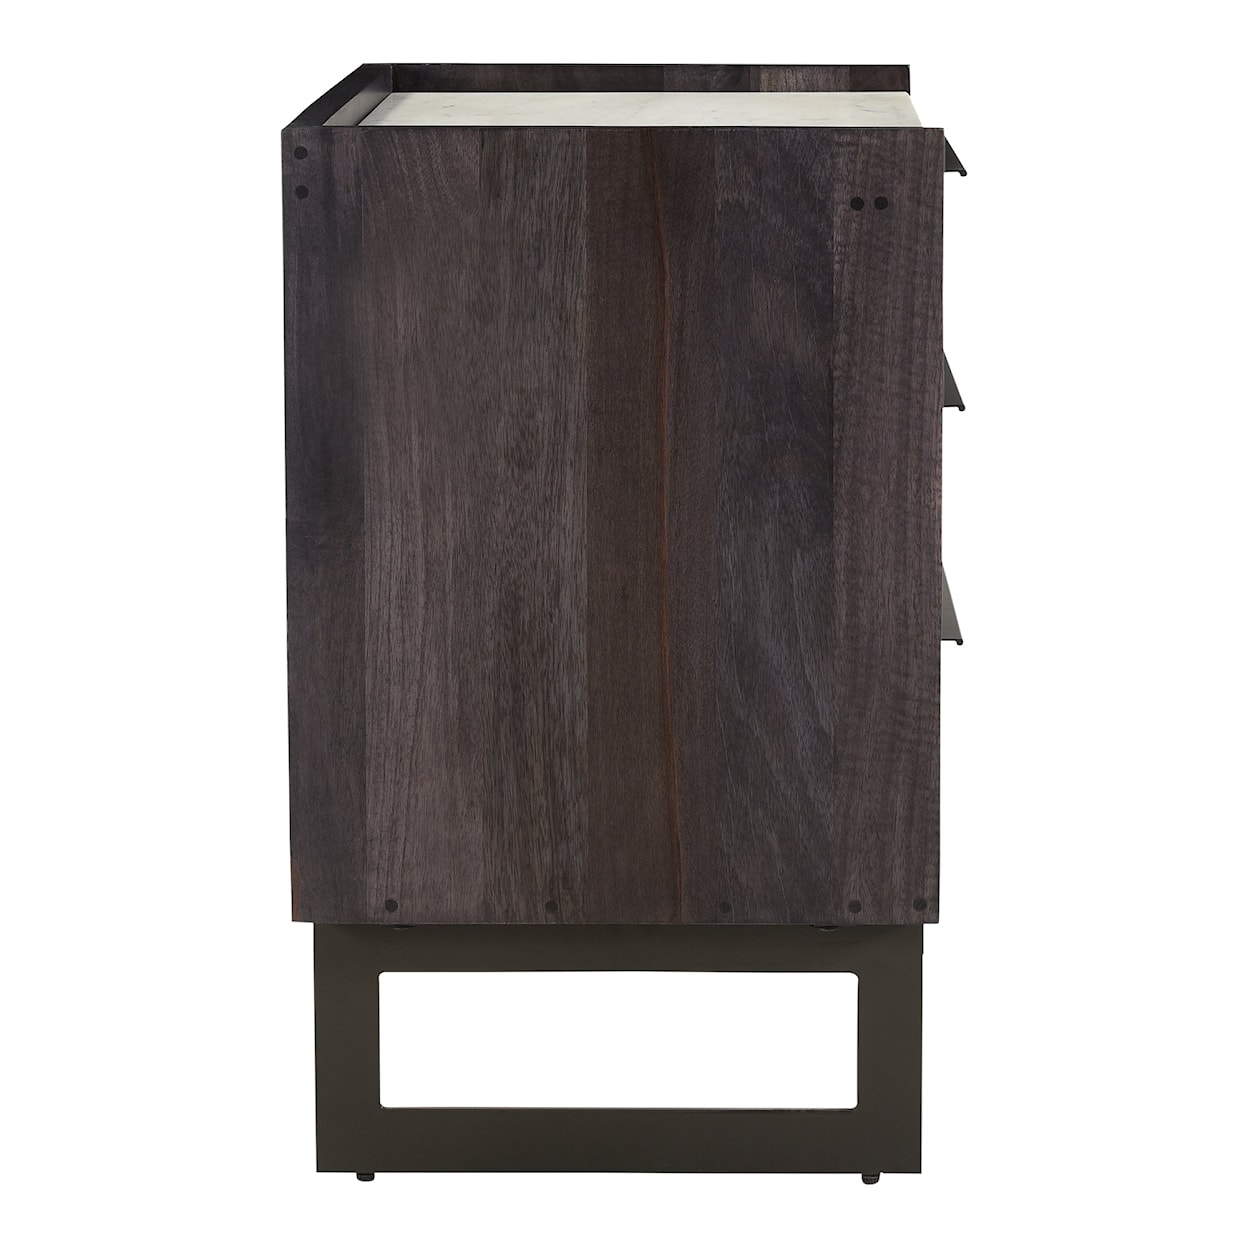 Moe's Home Collection Paloma Dresser